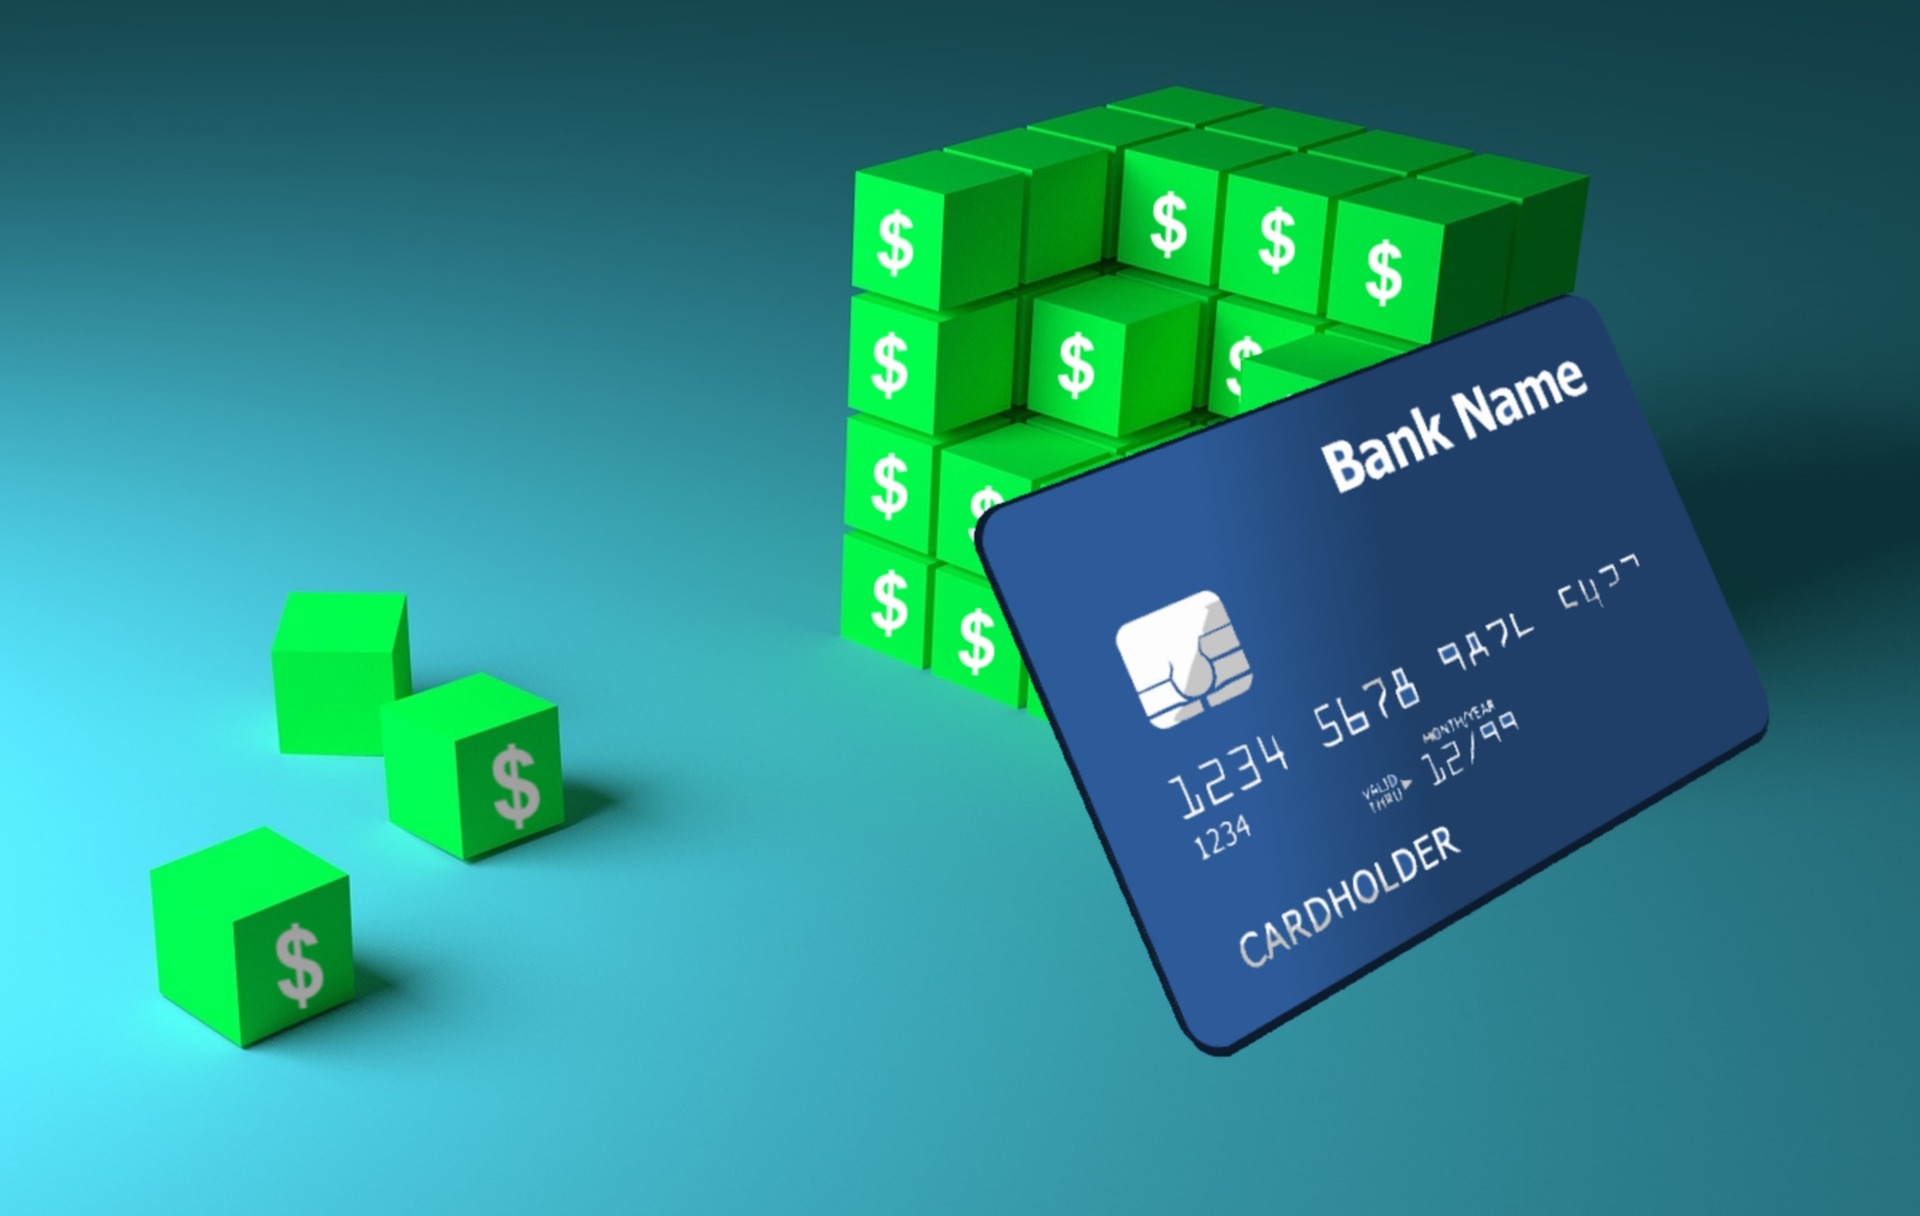 on a teal background, small green blocks prop up a blue bank credit card